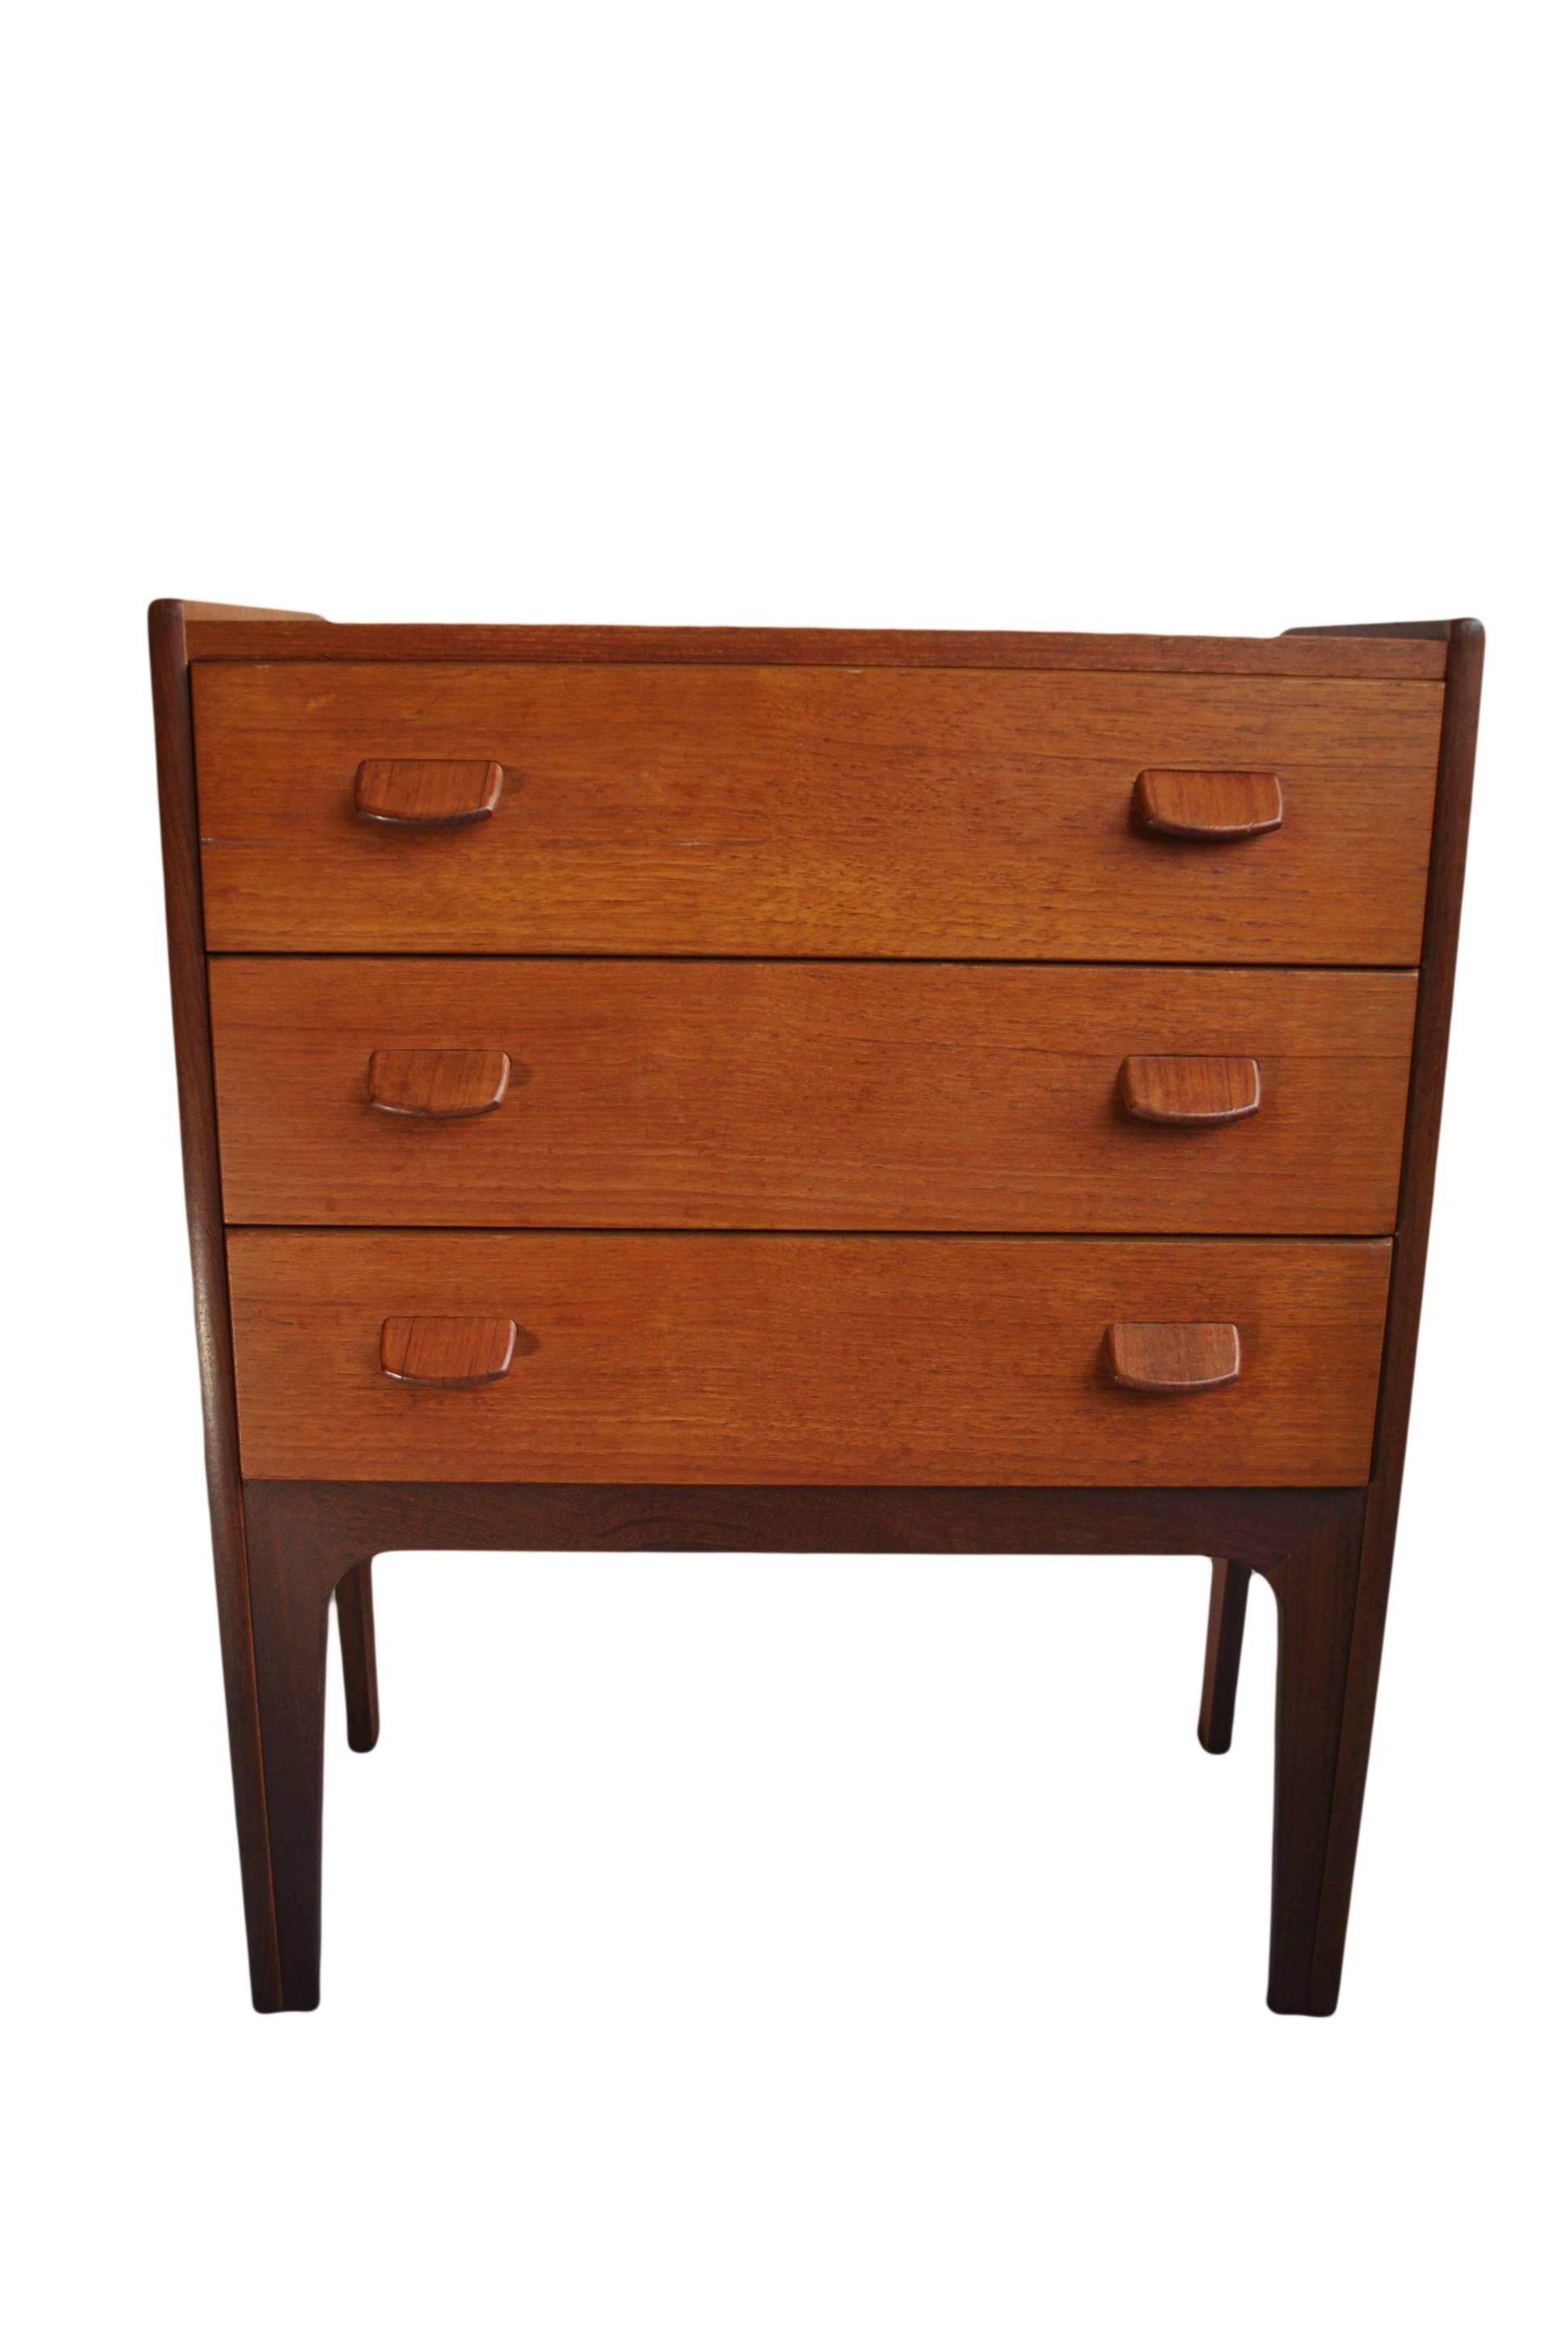 Poul Volther designed chest of drawers. Constructed in teak and afromosia.
Produced in Denmark, circa 1960.